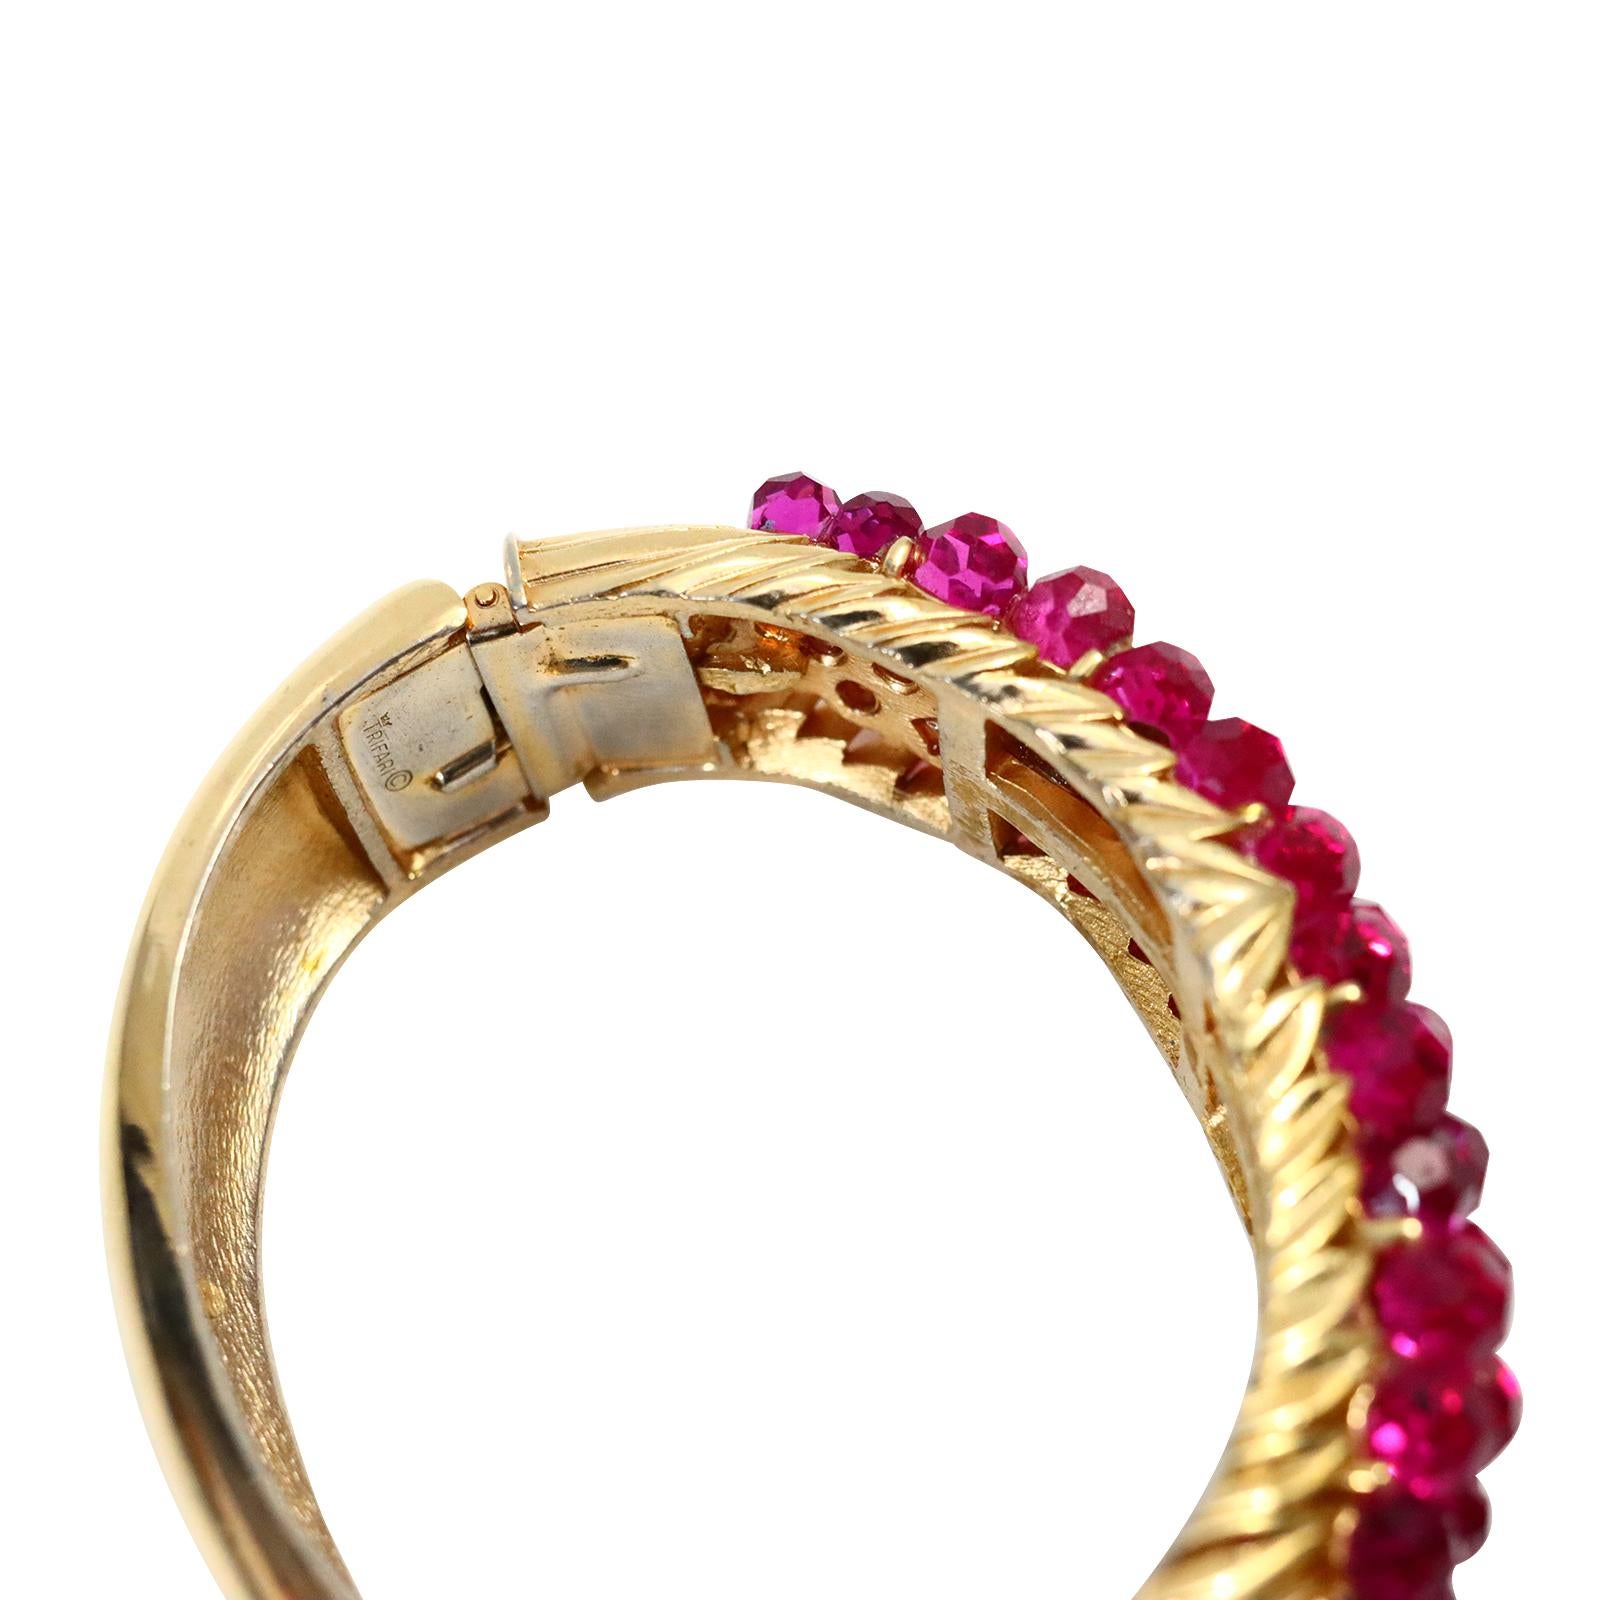 Vintage Trifari Gold Tone Bracelet with Pink Beads Circa 1980s In Good Condition For Sale In New York, NY